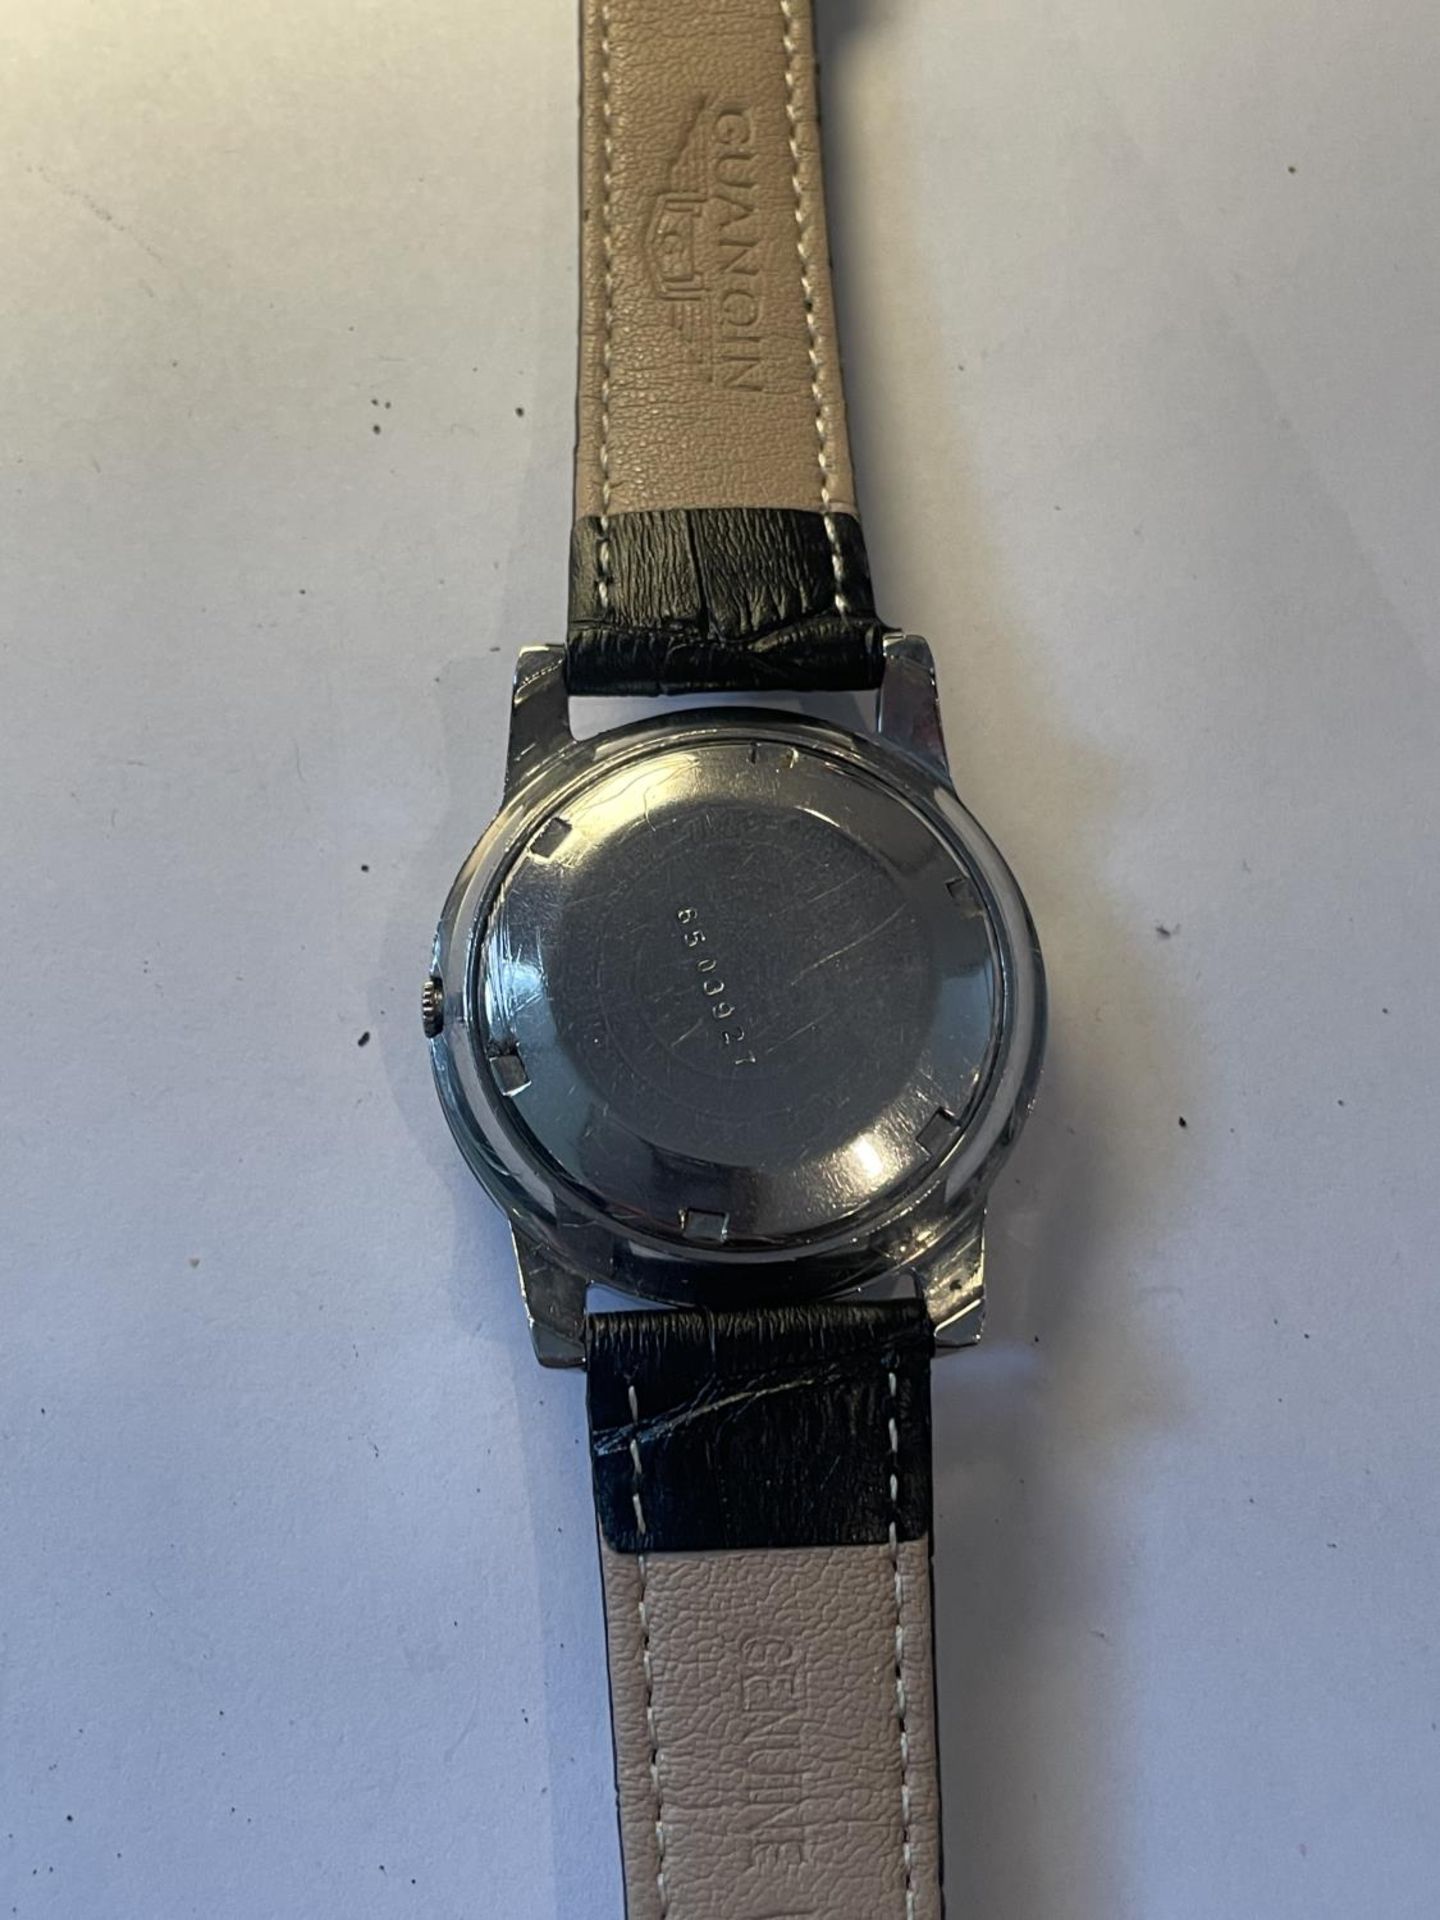 A VINTAGE SEIKO SPORTSMATIC AUTOMATIC WRISTWATCH 7625-8060 SEEN WORKING BUT NO WARRANTY - Image 3 of 3